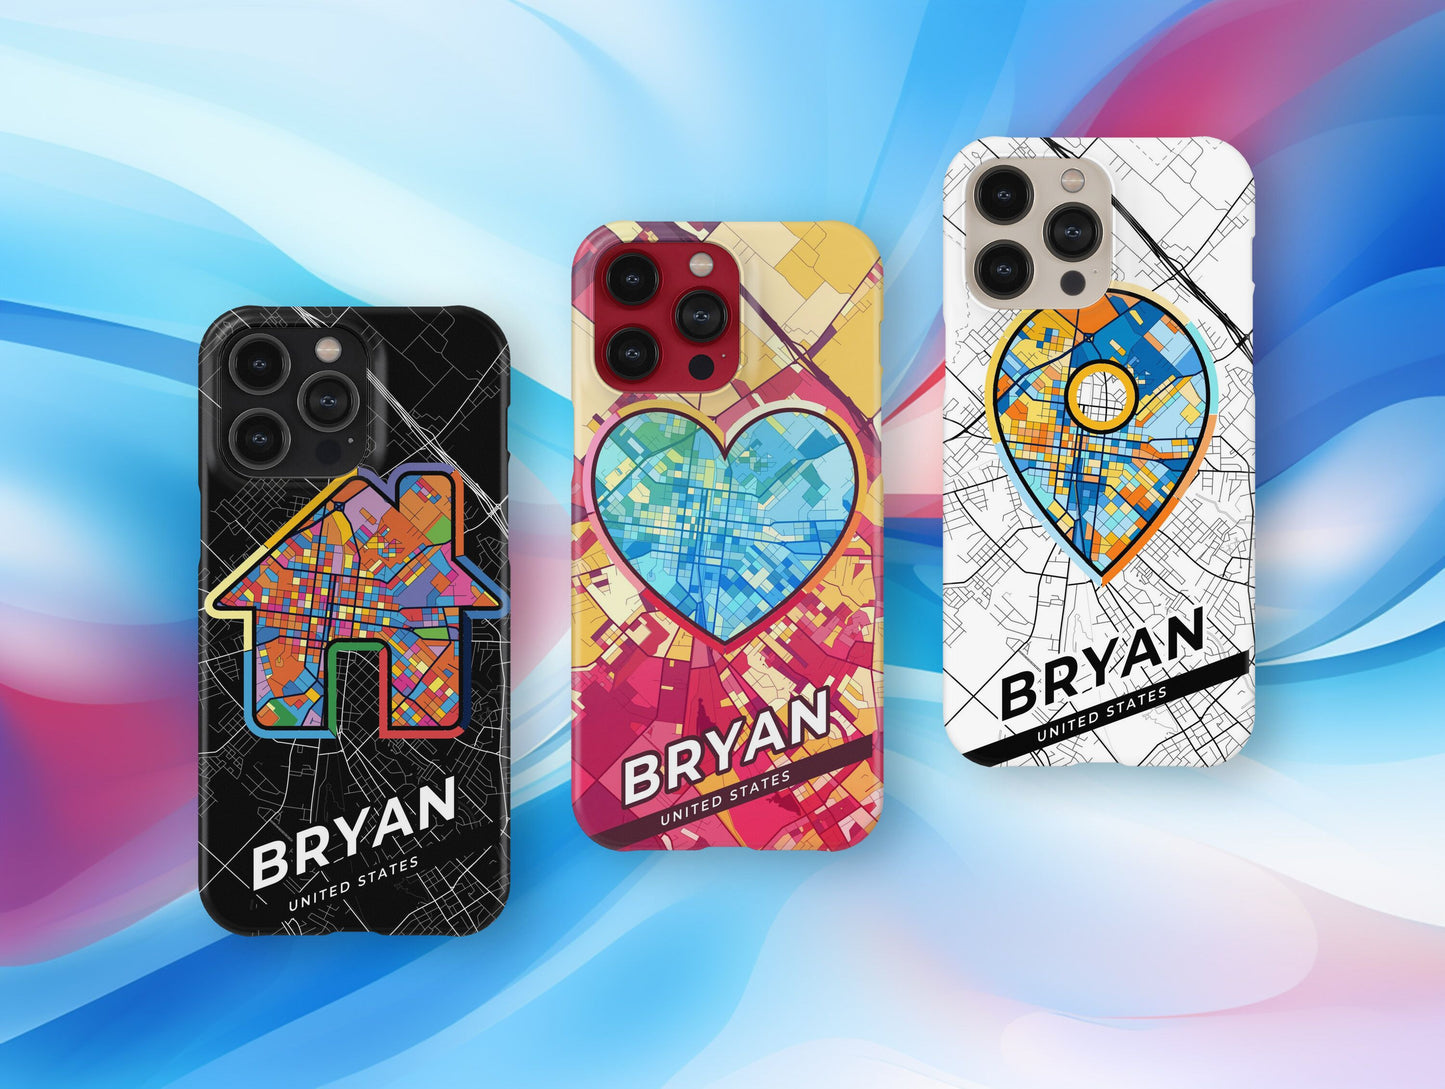 Bryan Texas slim phone case with colorful icon. Birthday, wedding or housewarming gift. Couple match cases.